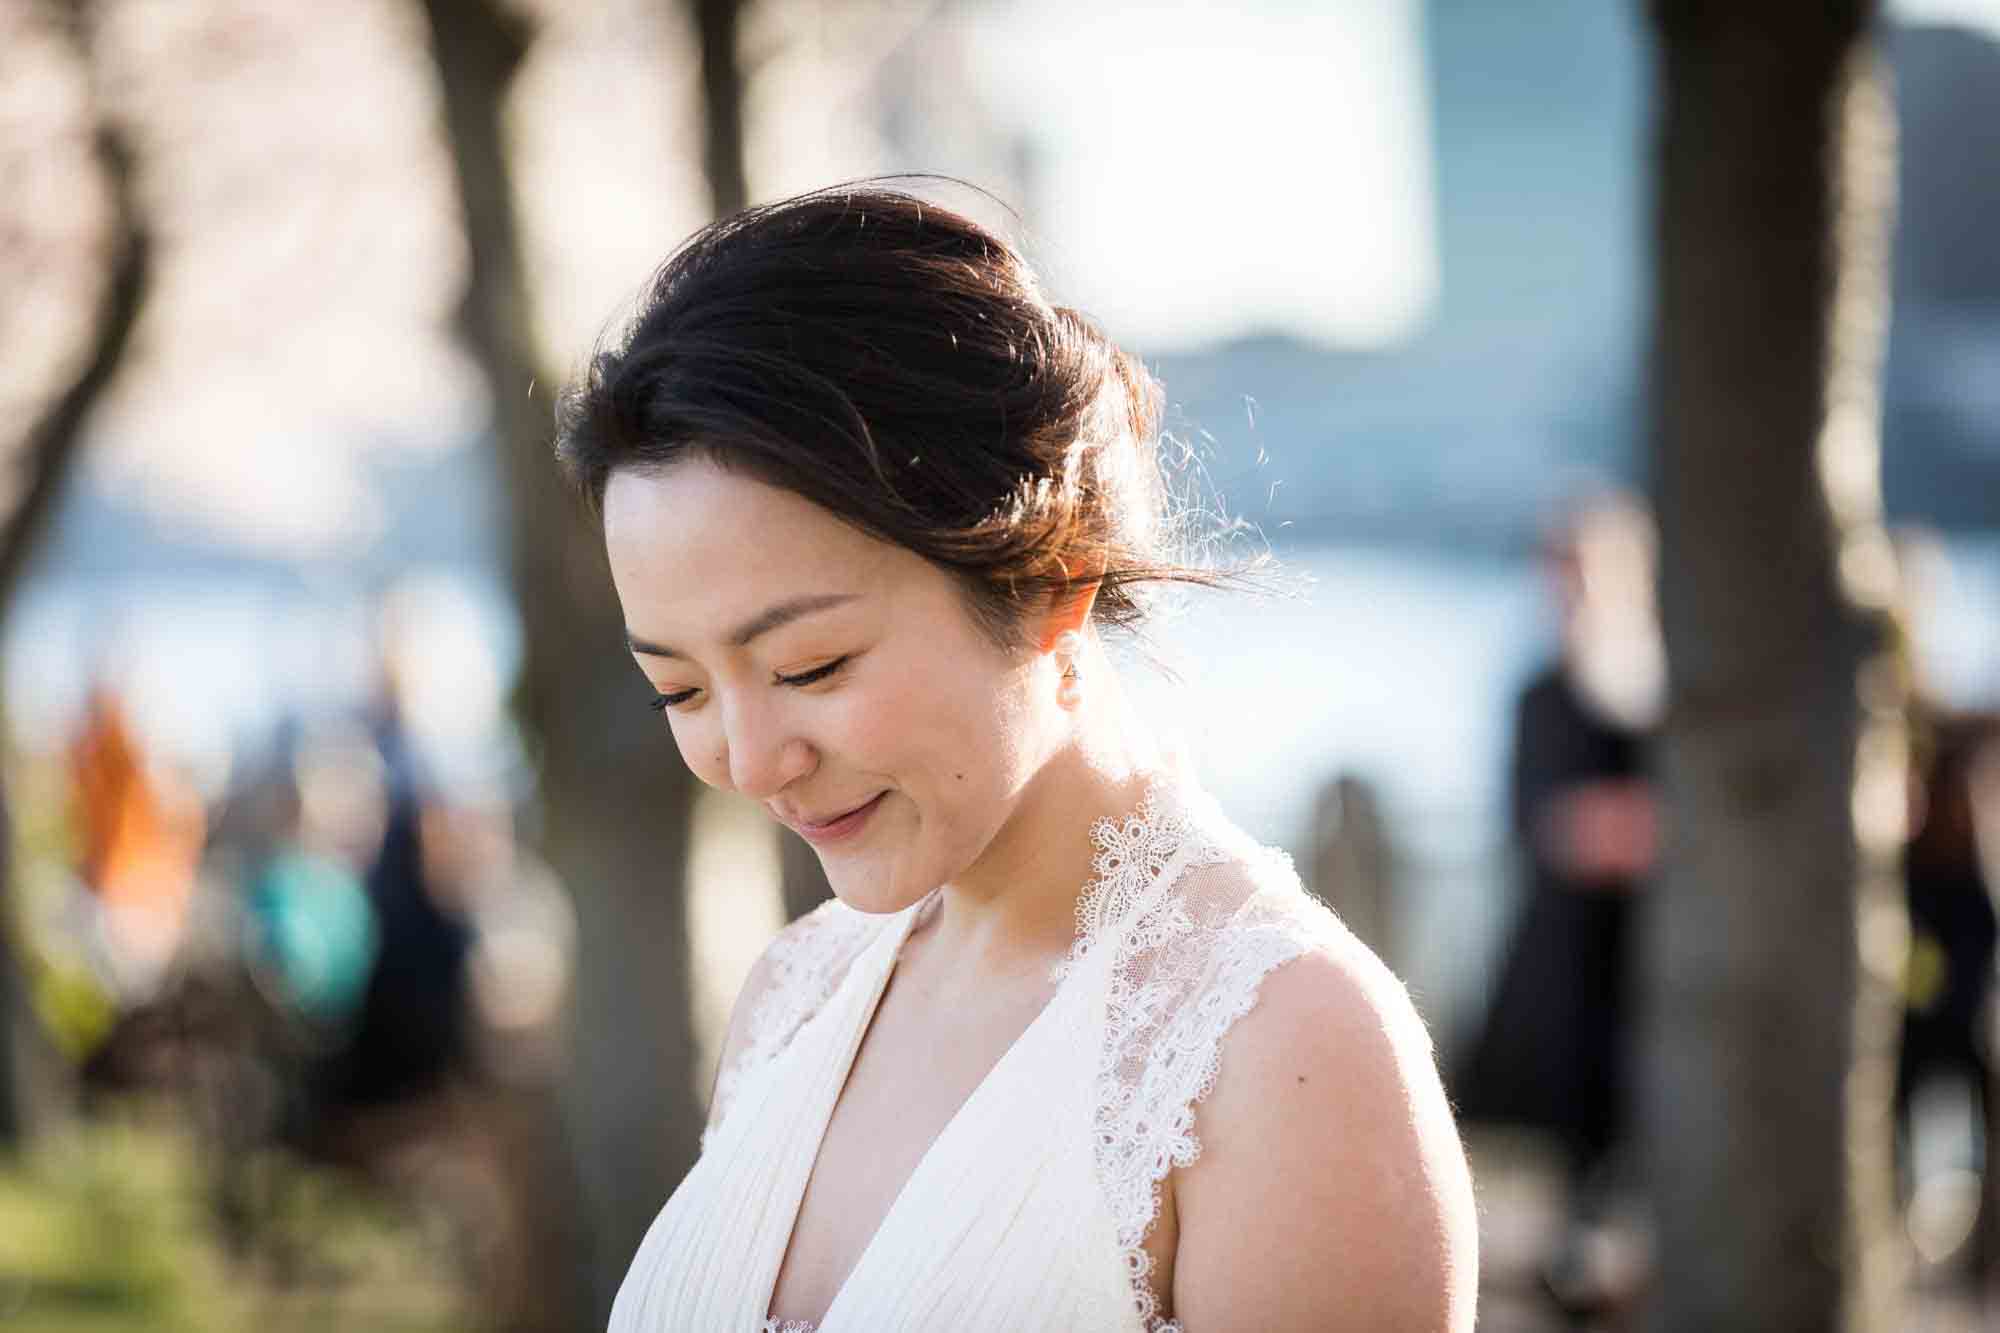 Woman wearing white dress looking down and smiling Couple walking under cherry blossom trees during a Roosevelt Island engagement photo shoot